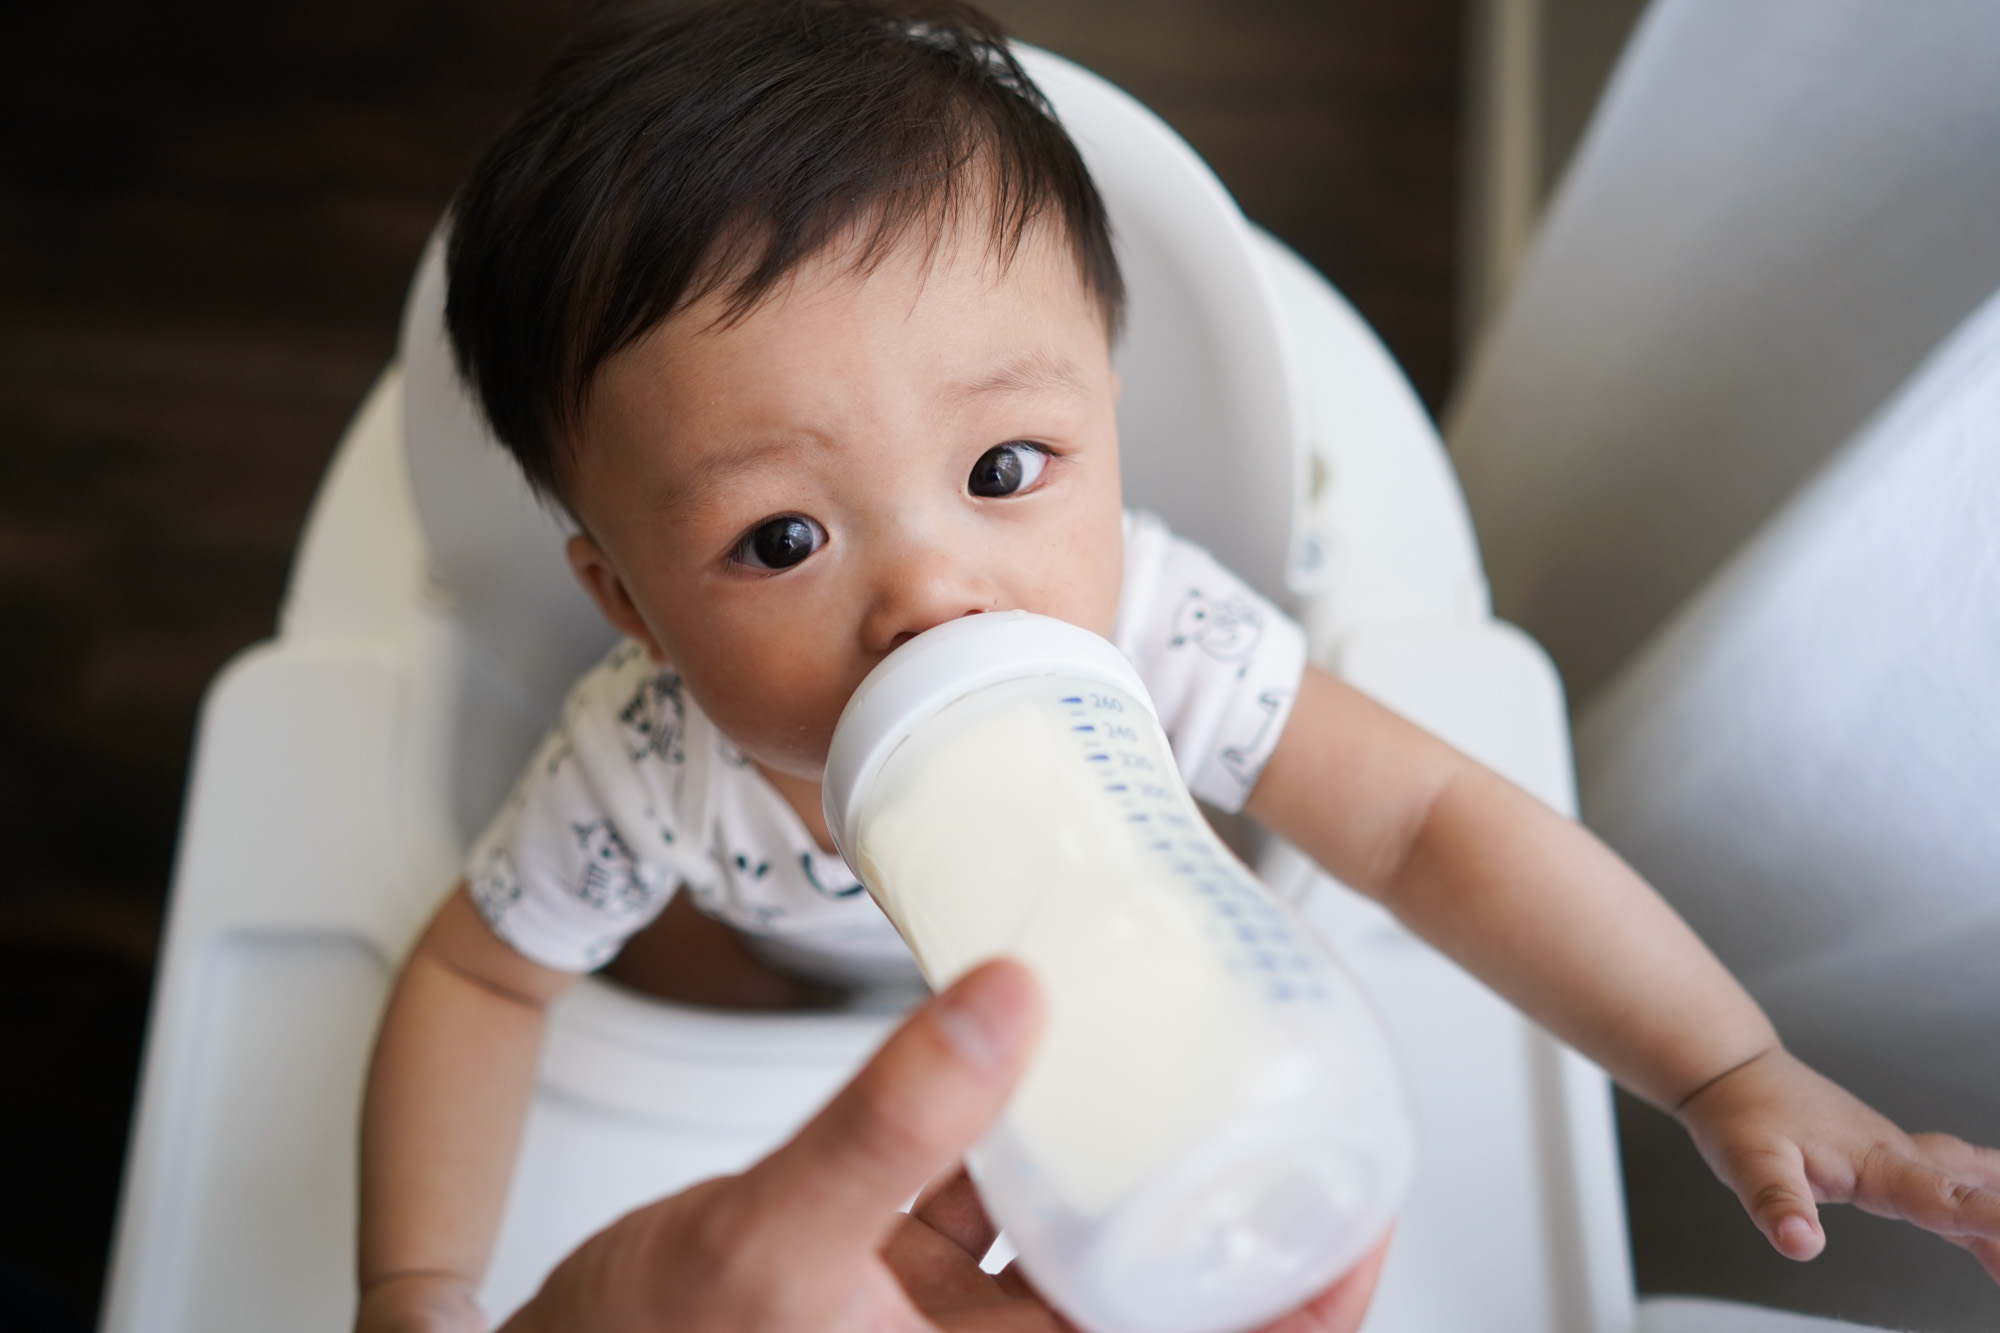 A baby drinking from a bottle